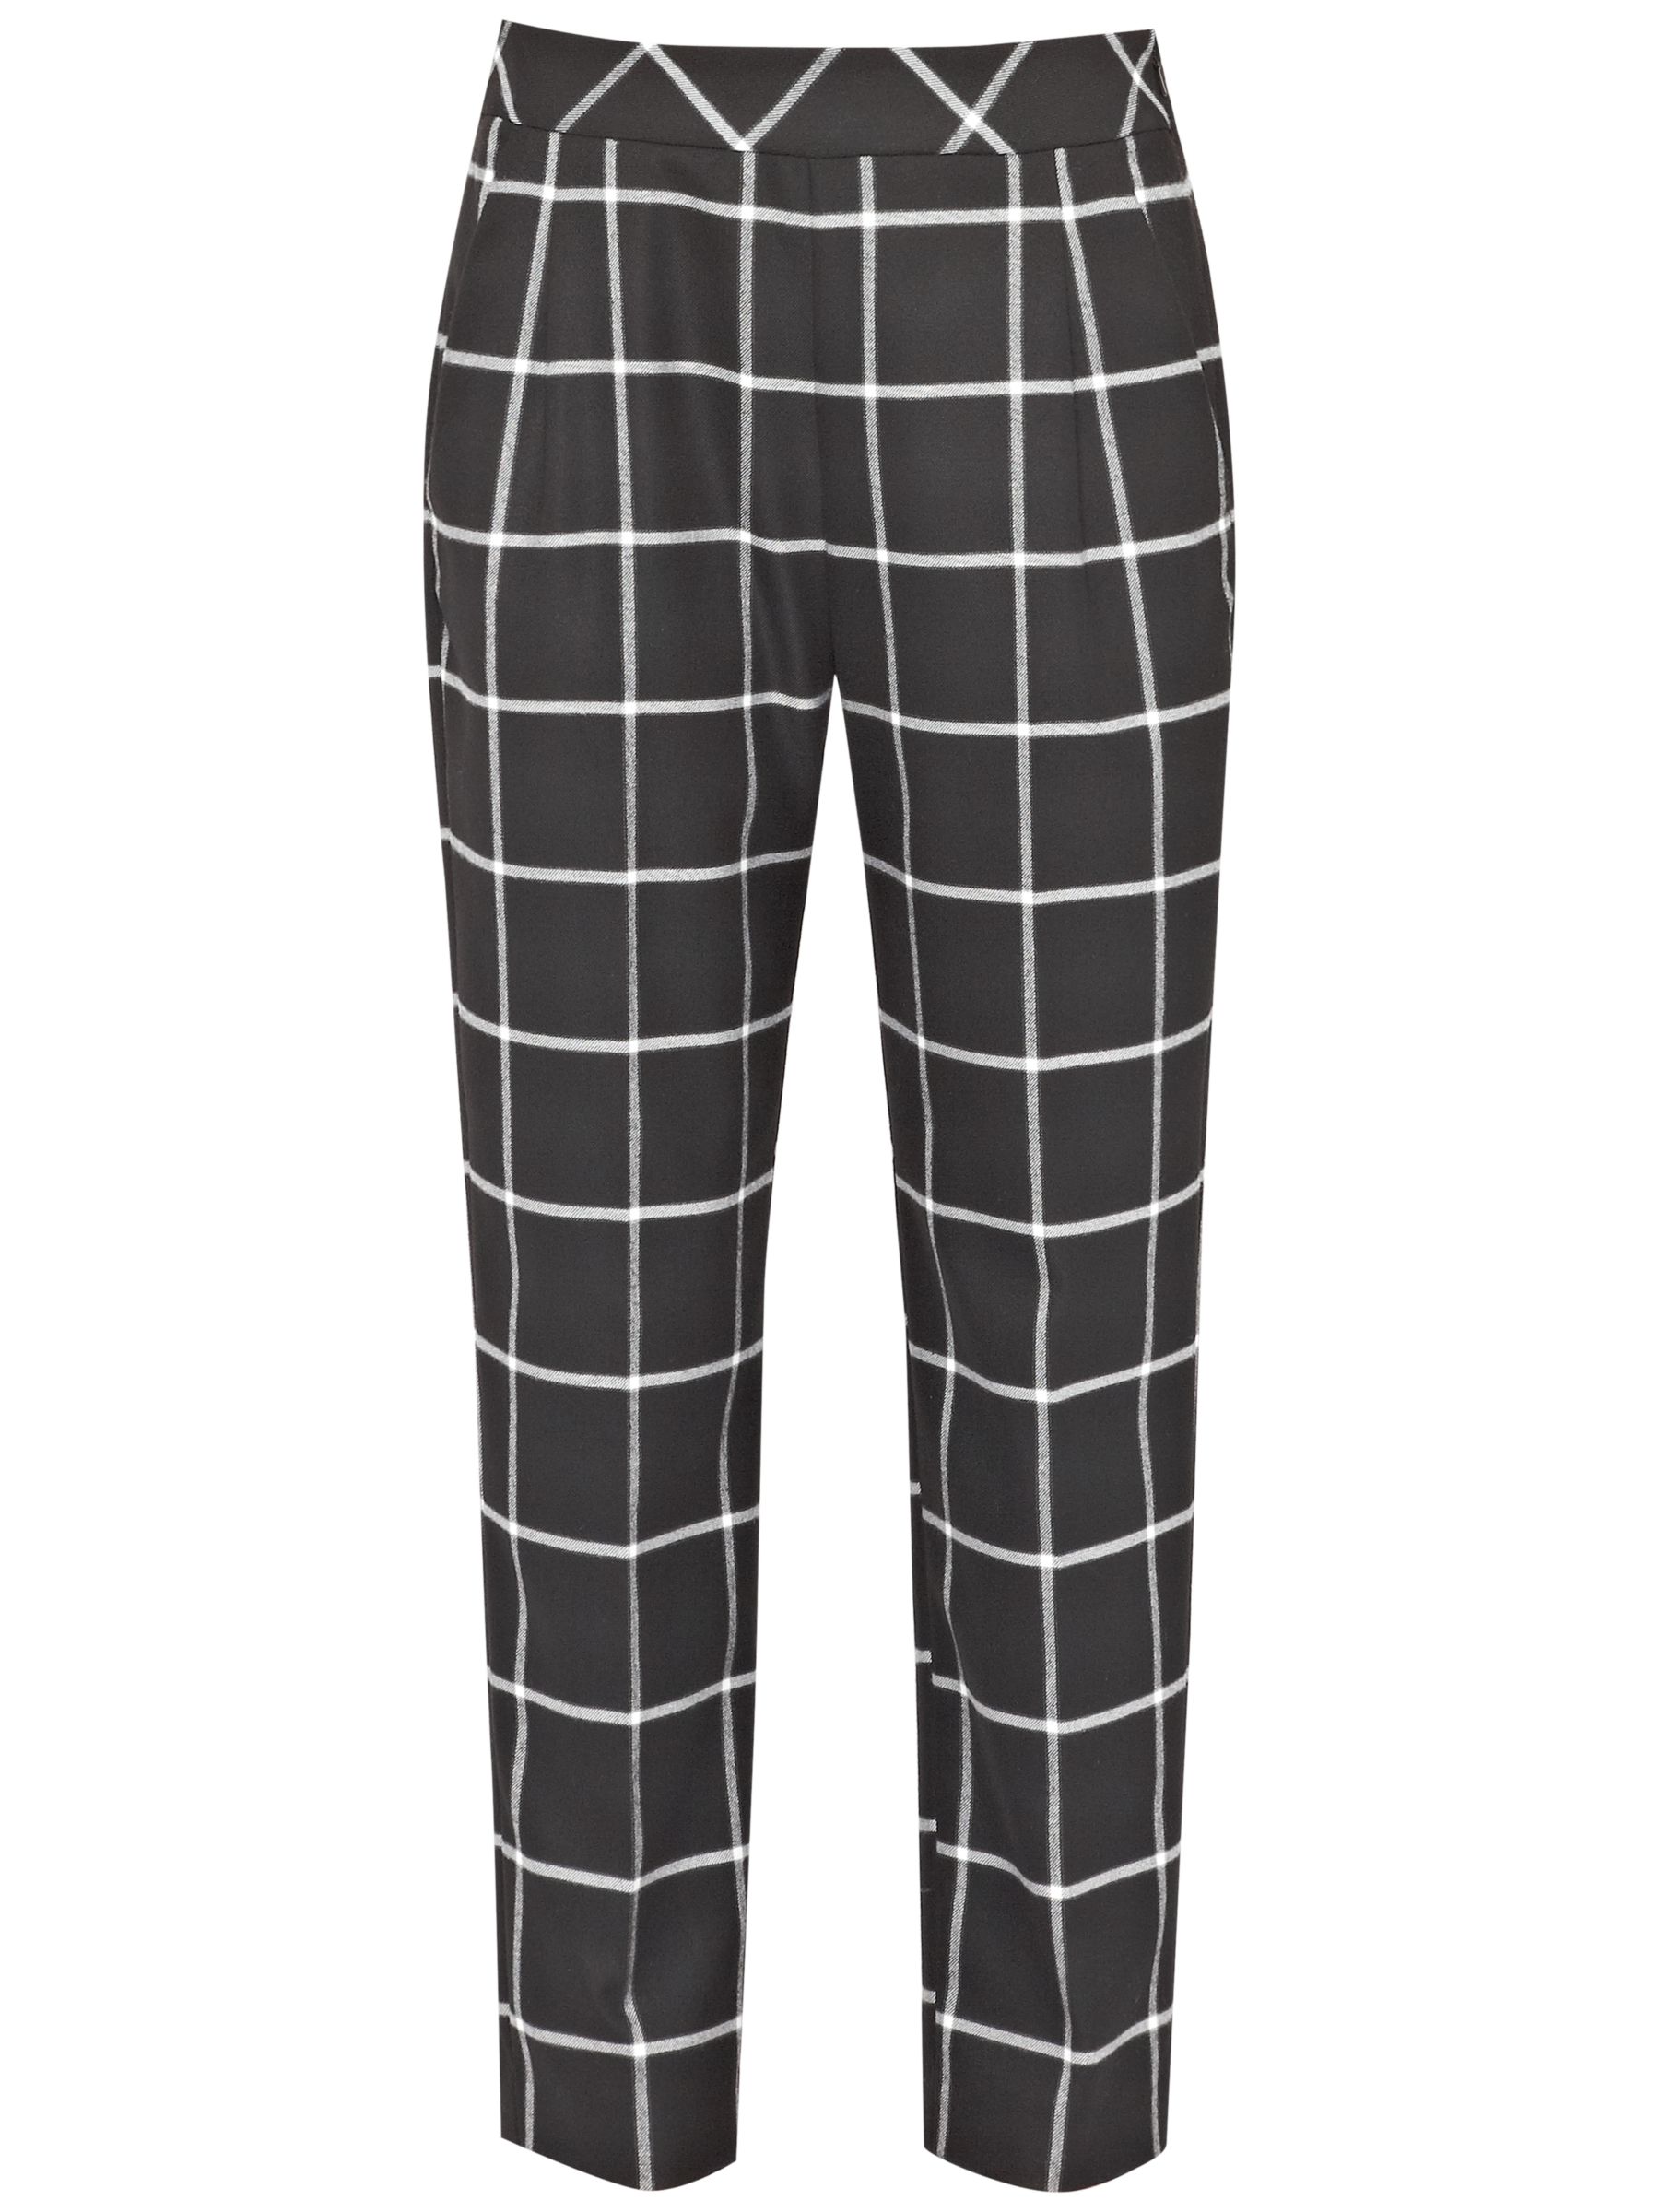 black and white checkered trousers womens